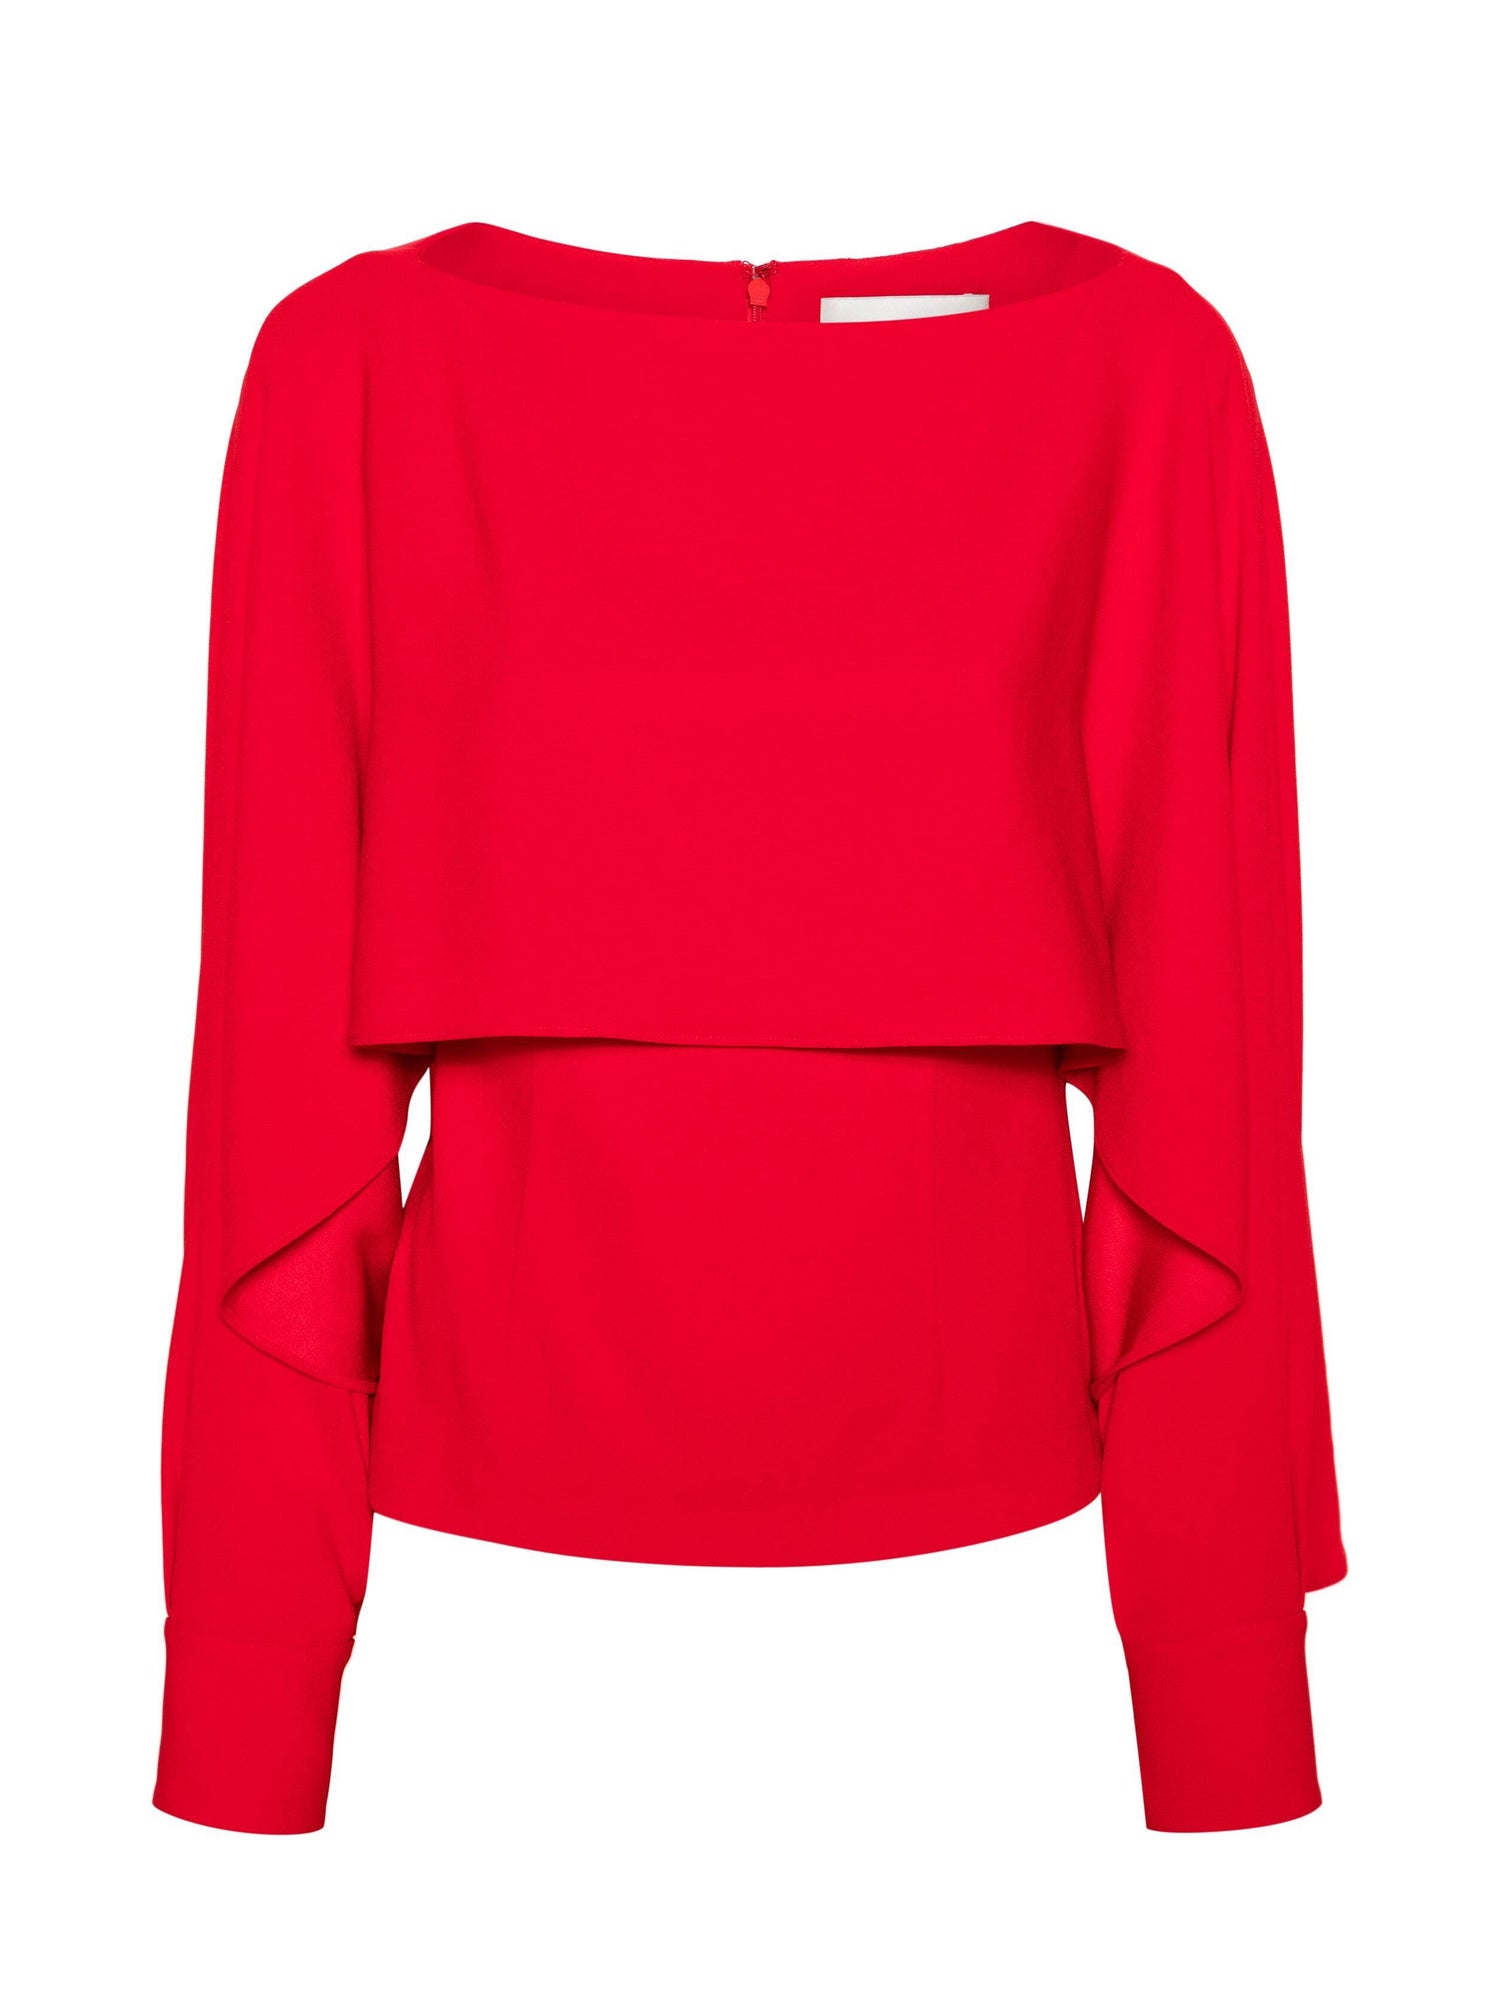 LONG SLEEVE SATIN CREPE TOP, RED